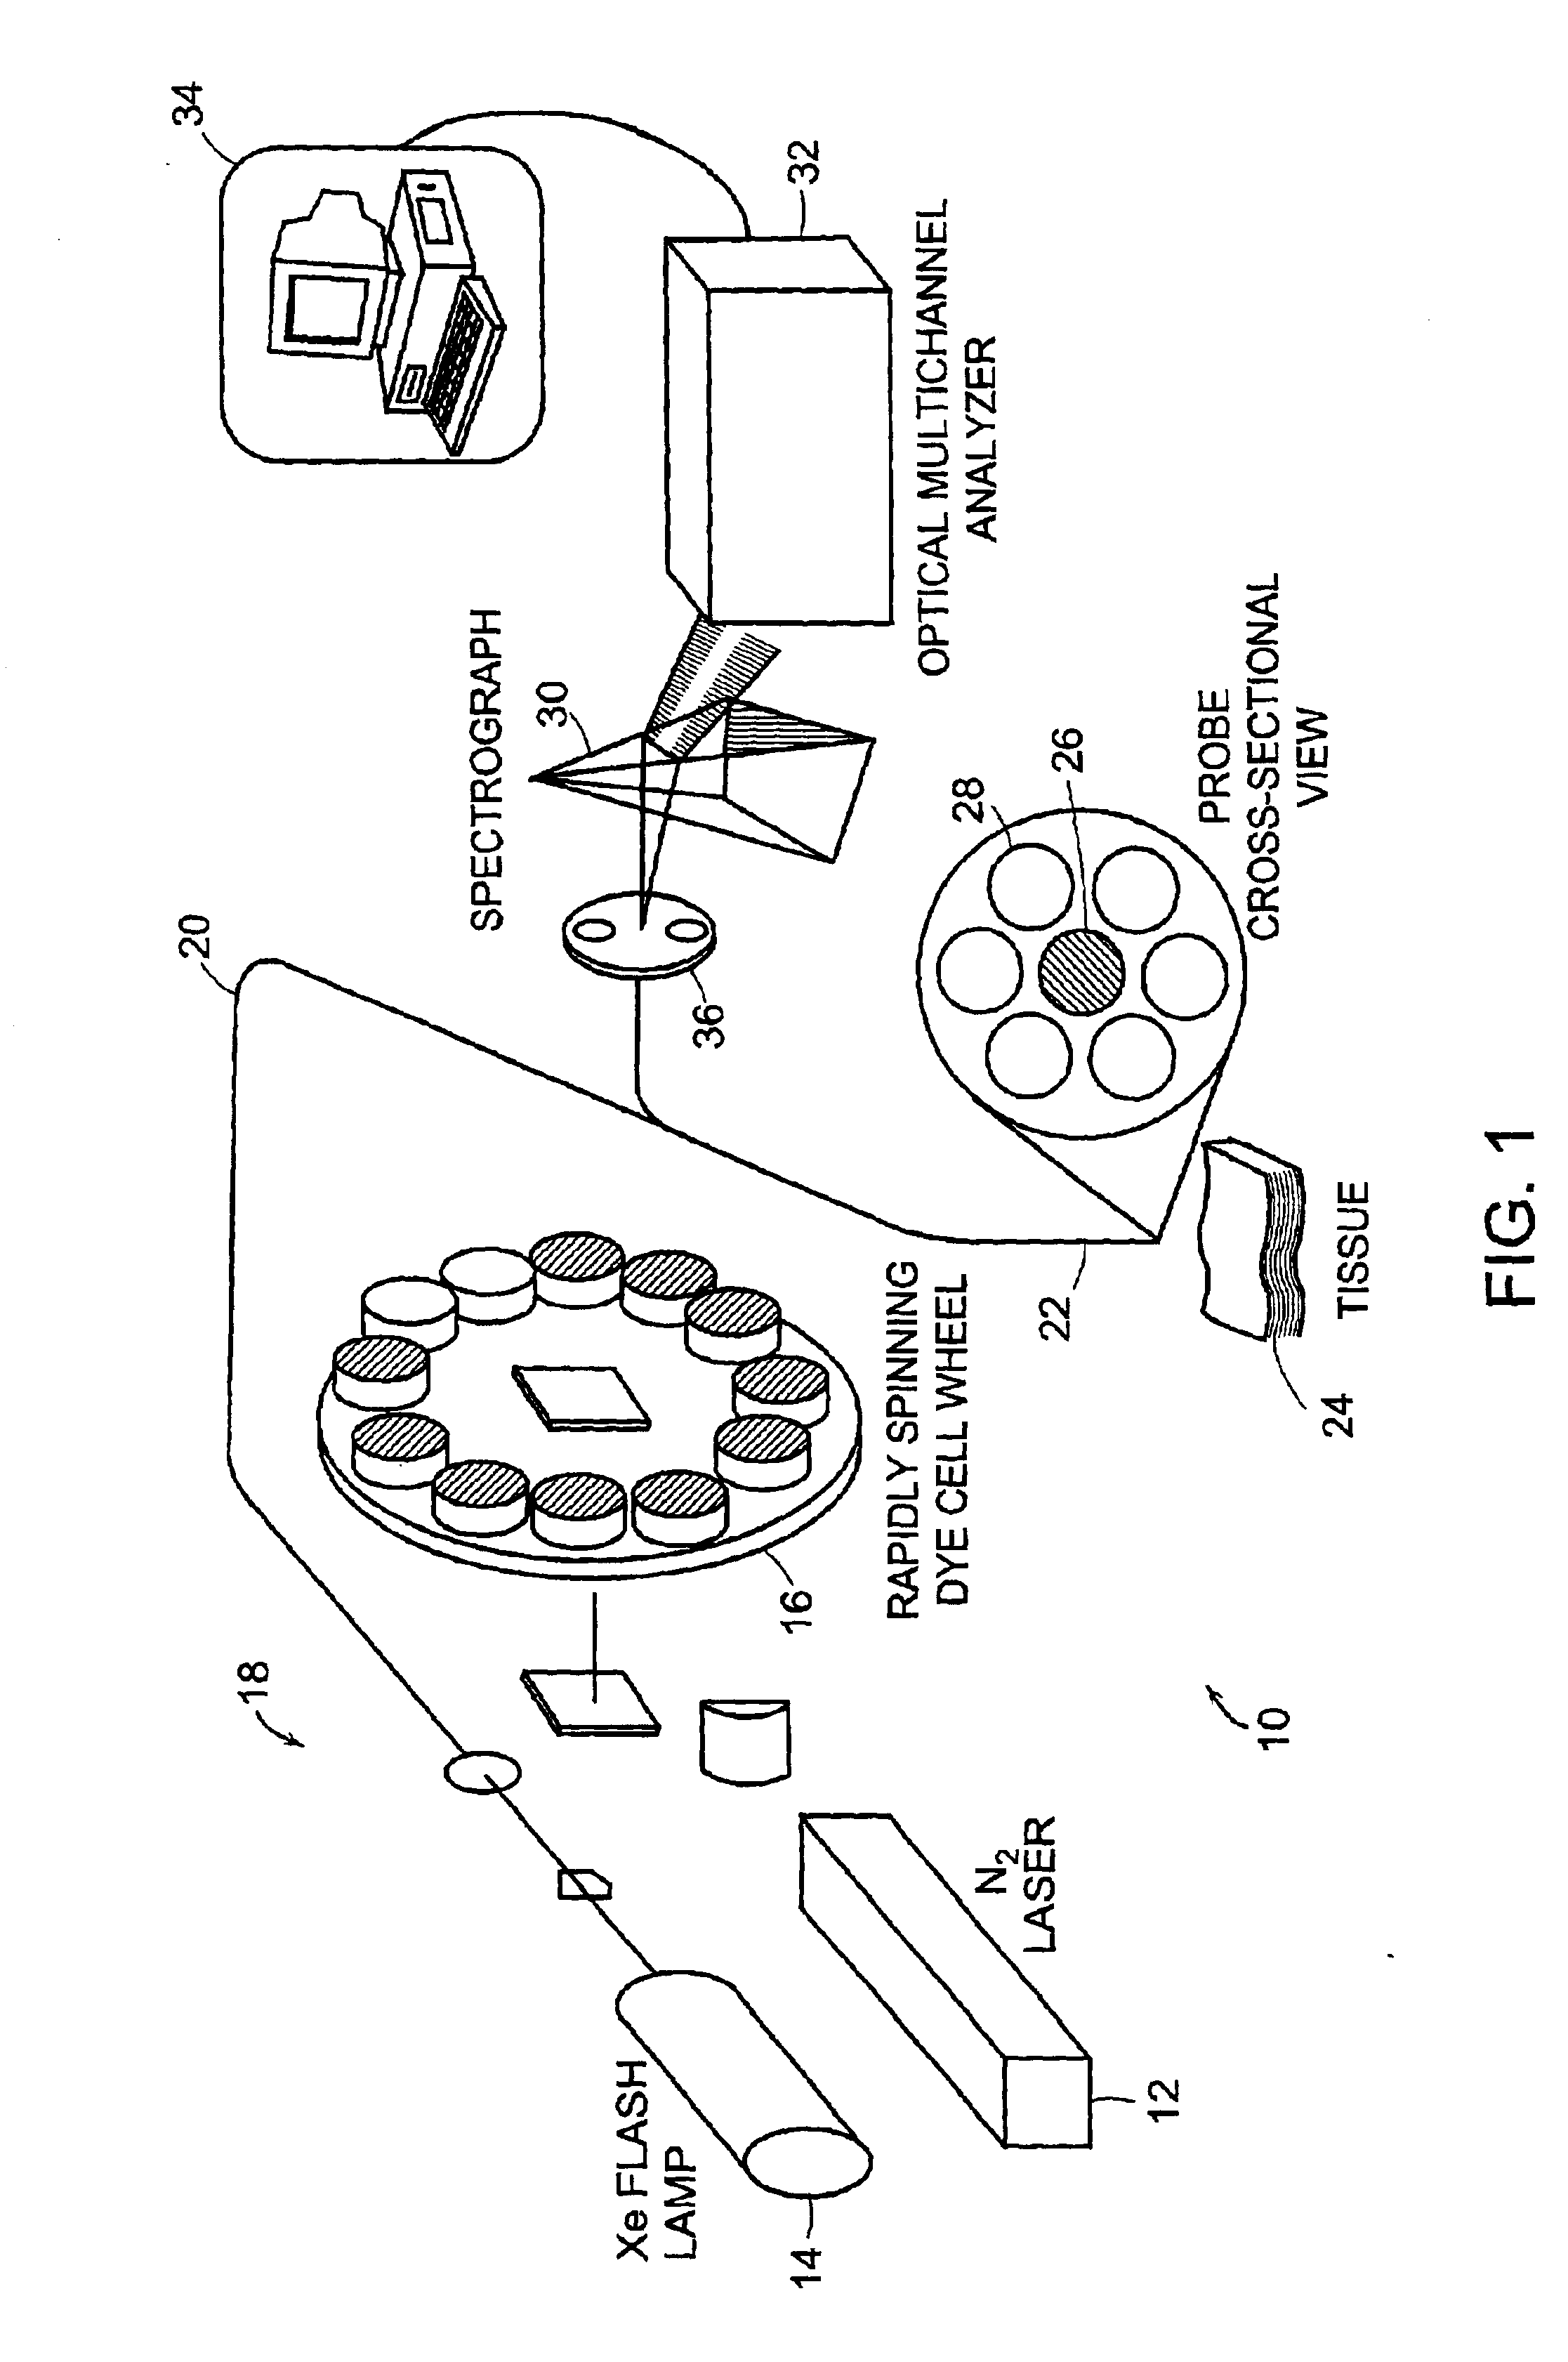 System and methods of fluorescence, reflectance and light scattering spectroscopy for measuring tissue characteristics